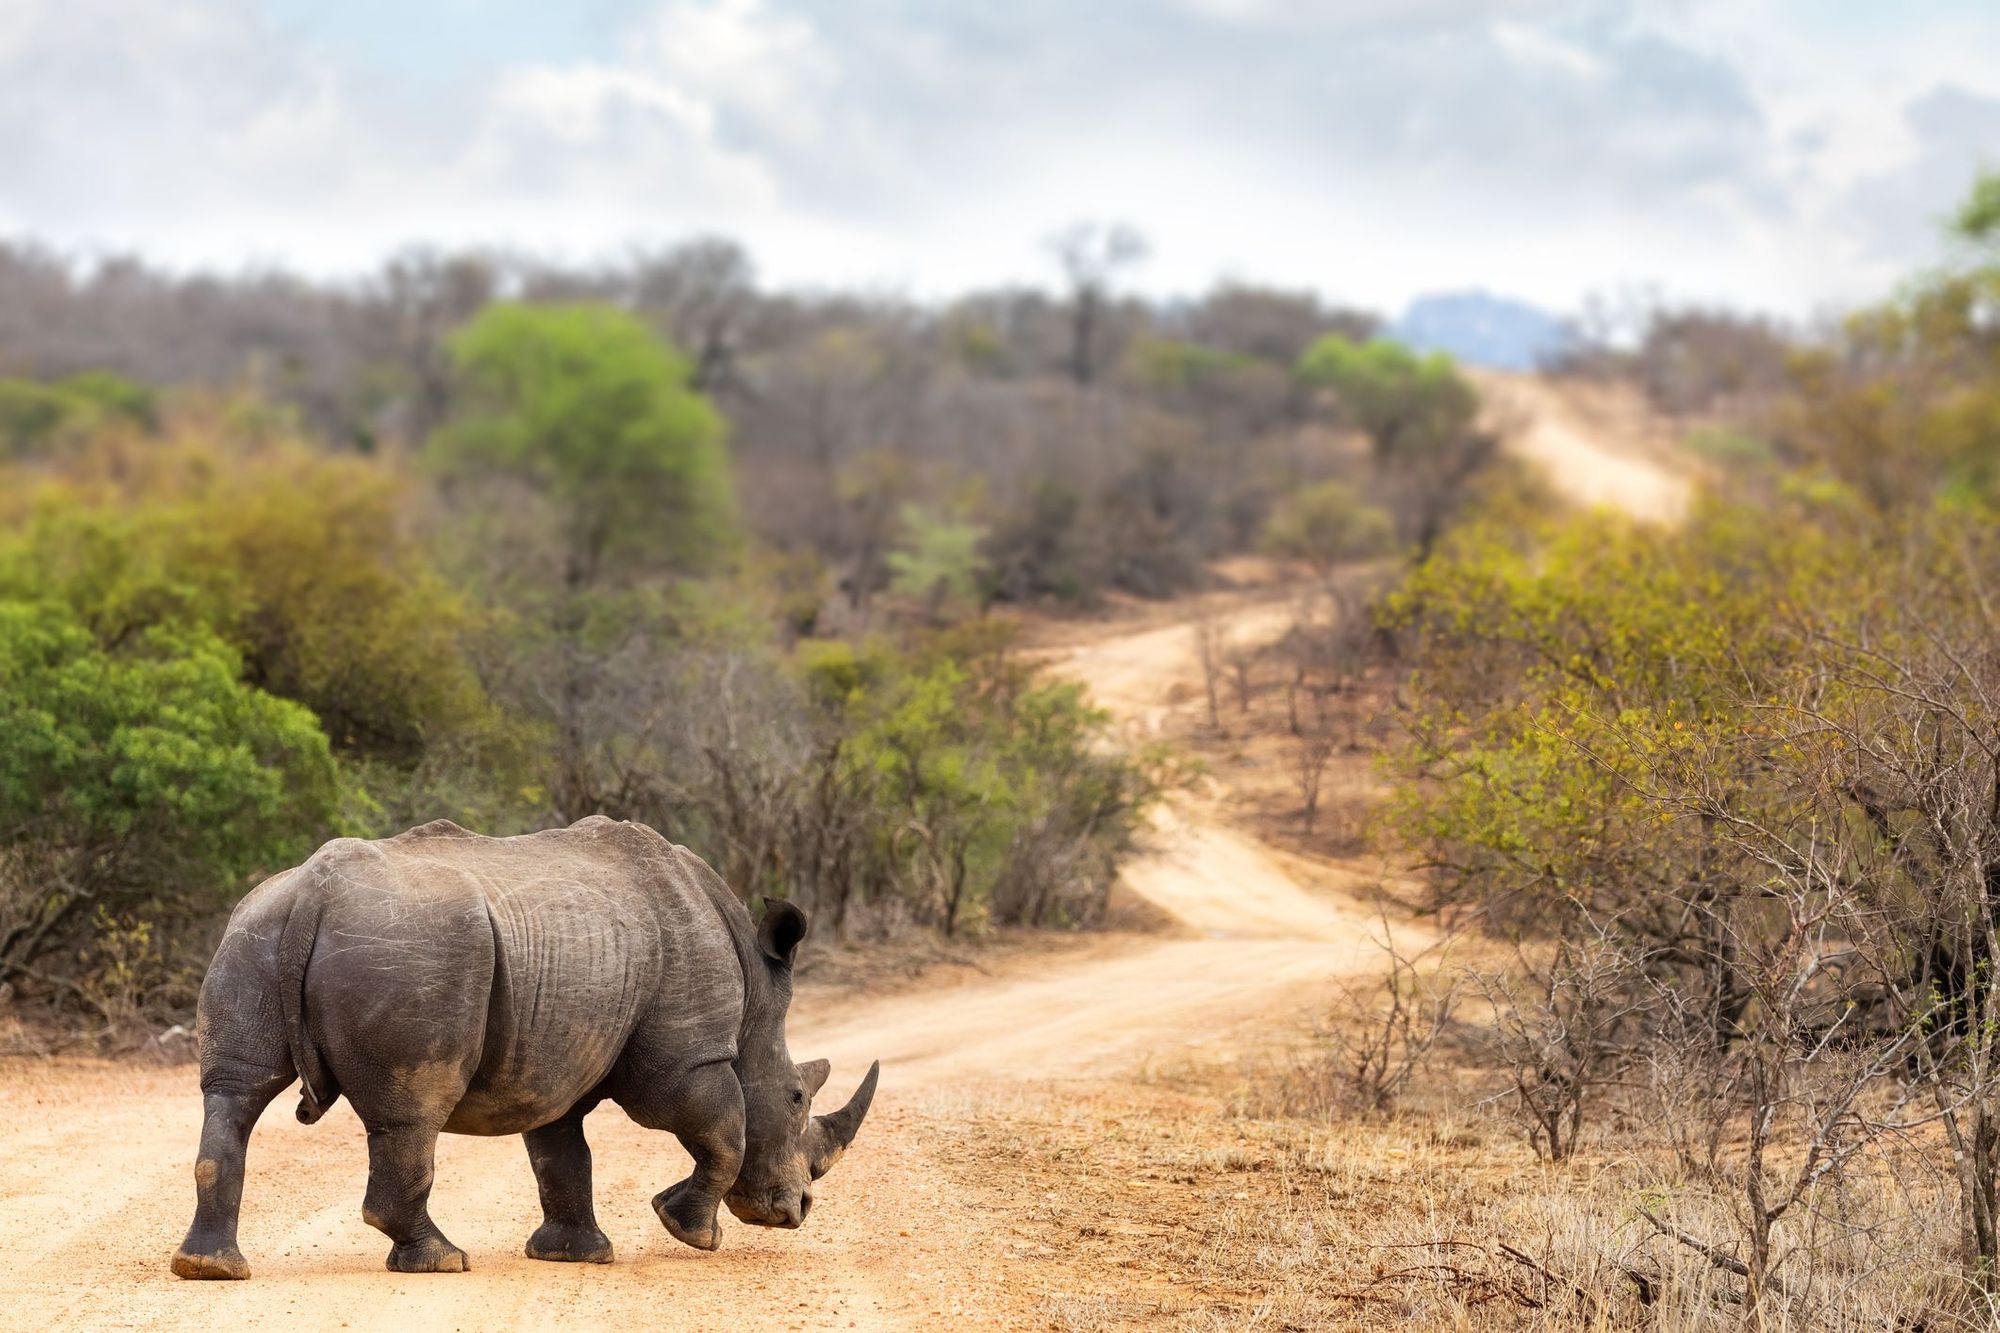 A rhinoceros crosses the road in Kruger National Park, South Africa